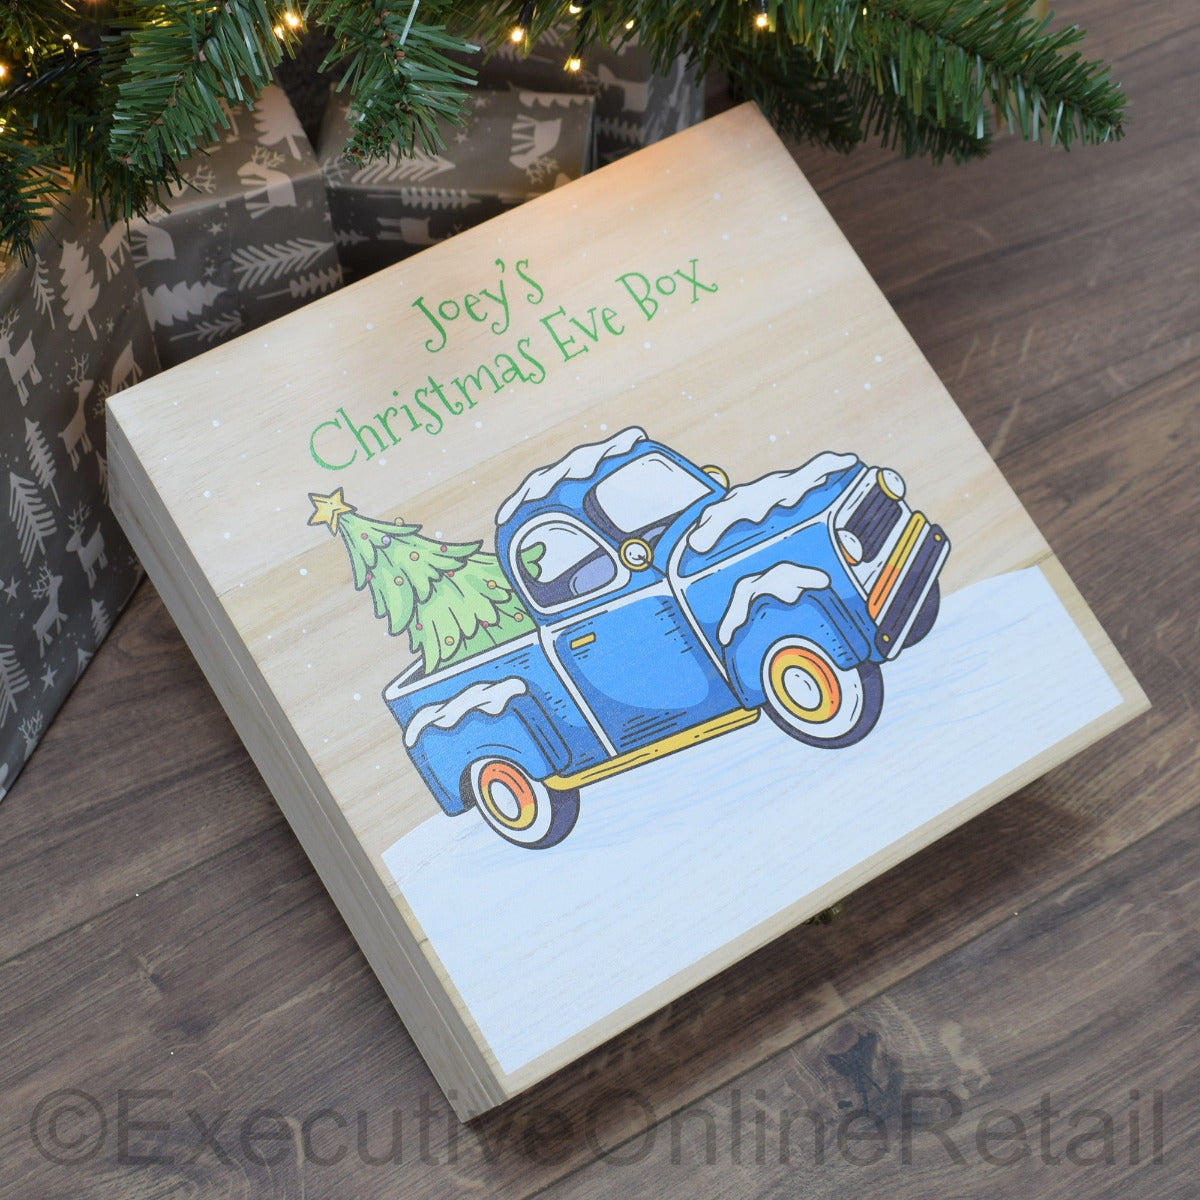 Personalised Printed Wooden Christmas Eve Box - Christmas Truck